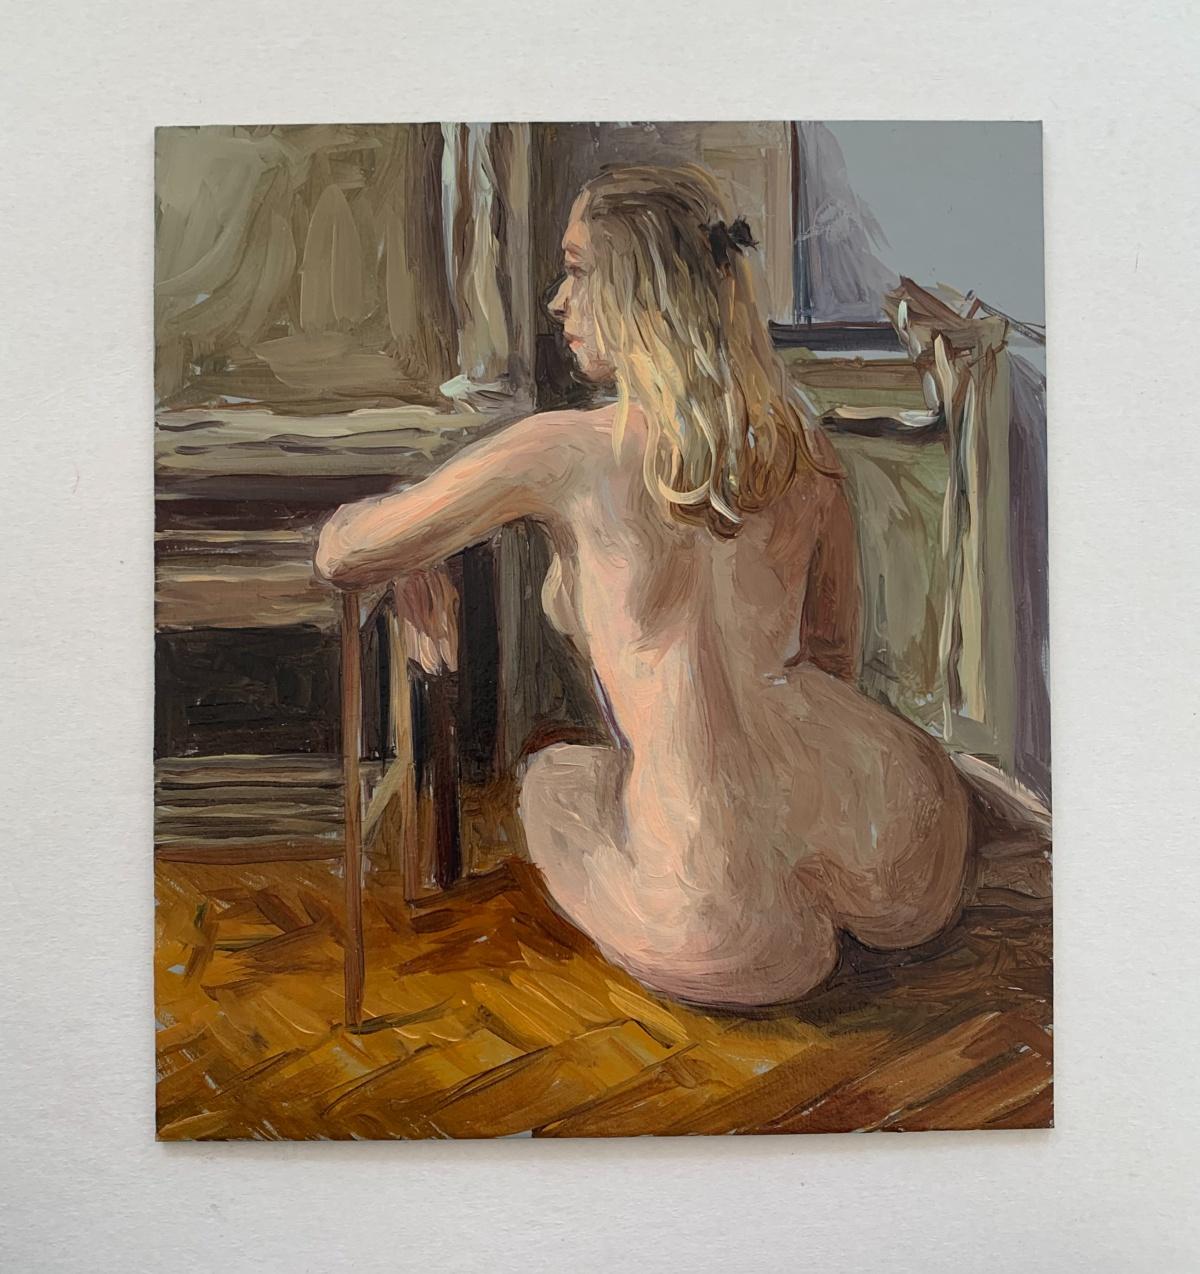 Nude with a bow - Realistic oil painting, Warm tones, Young Polish artist - Painting by Agnieszka Staak-Janczarska